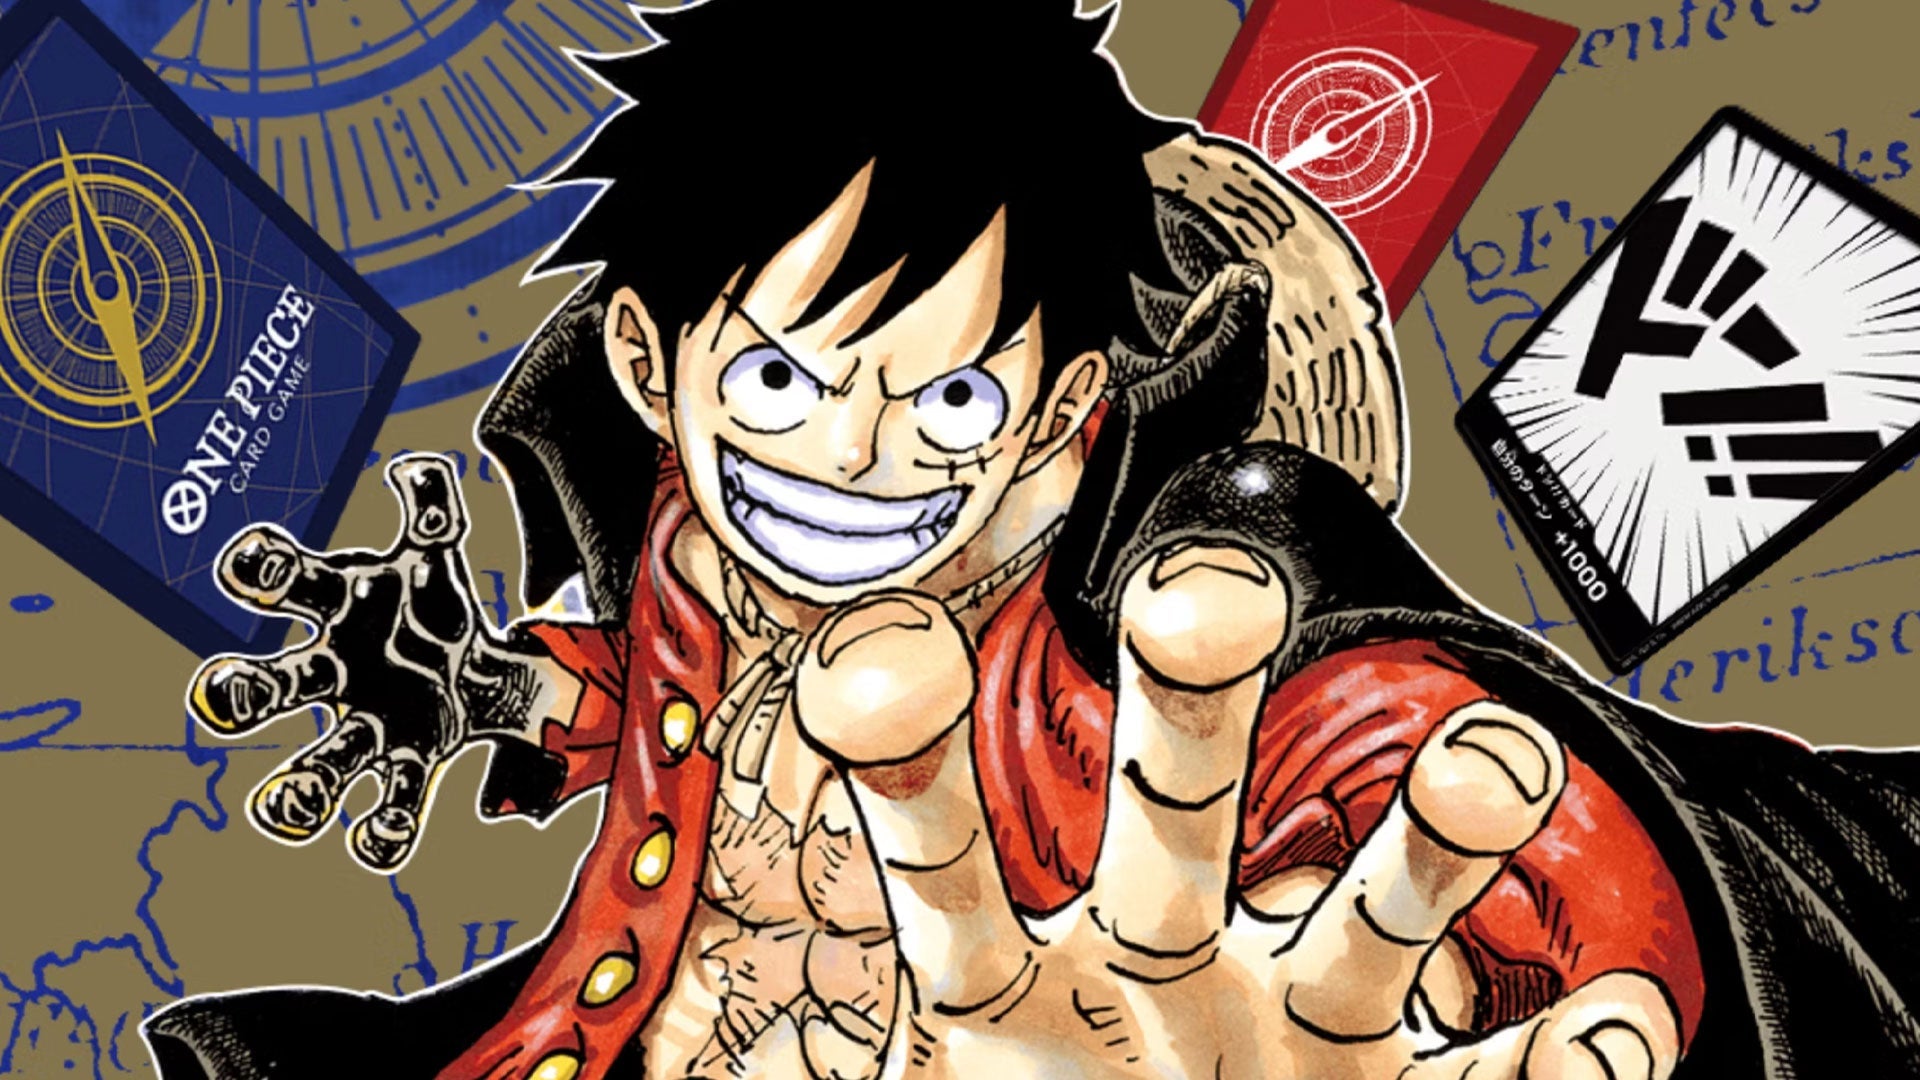 One Piece The Card Game